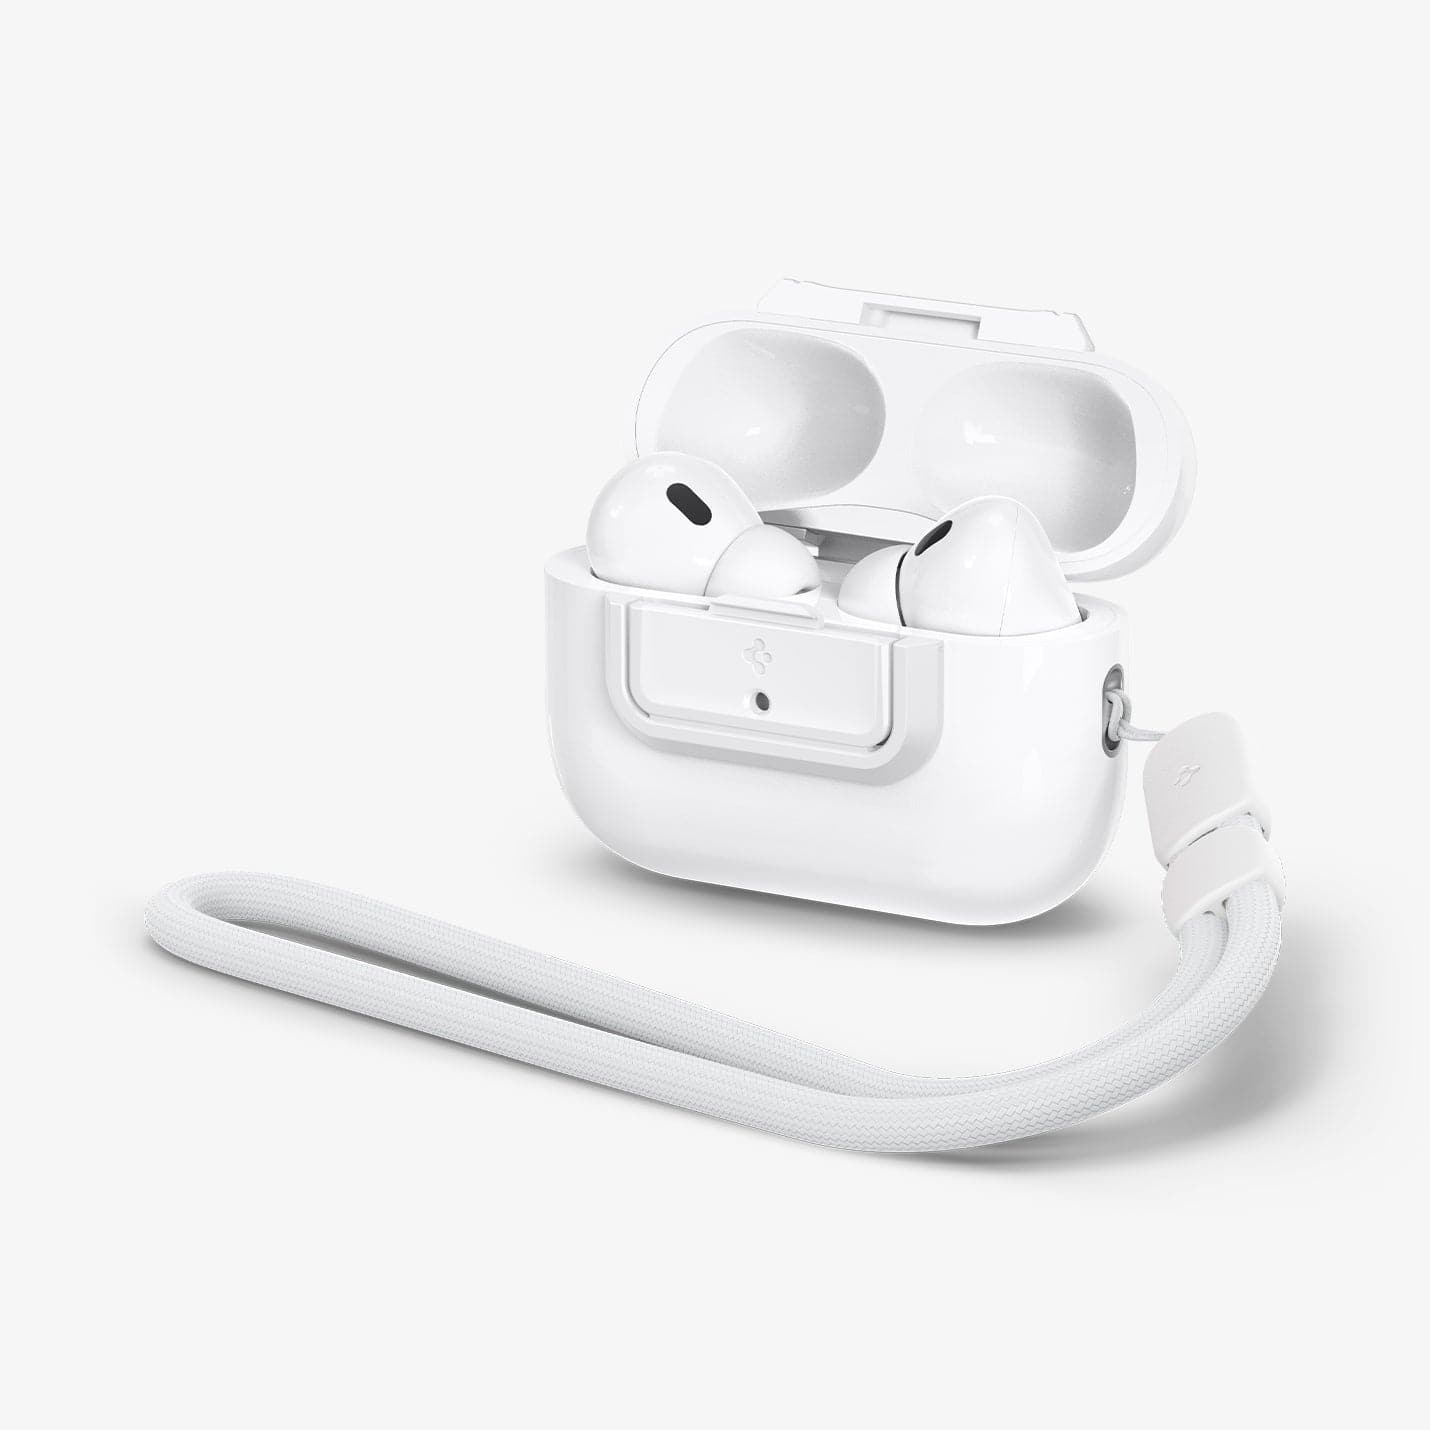 ASD06090 - Apple AirPods Pro / AirPods Pro 2 Case Lock Fit in white showing the front and side with lanyard attached and top open with AirPods inside